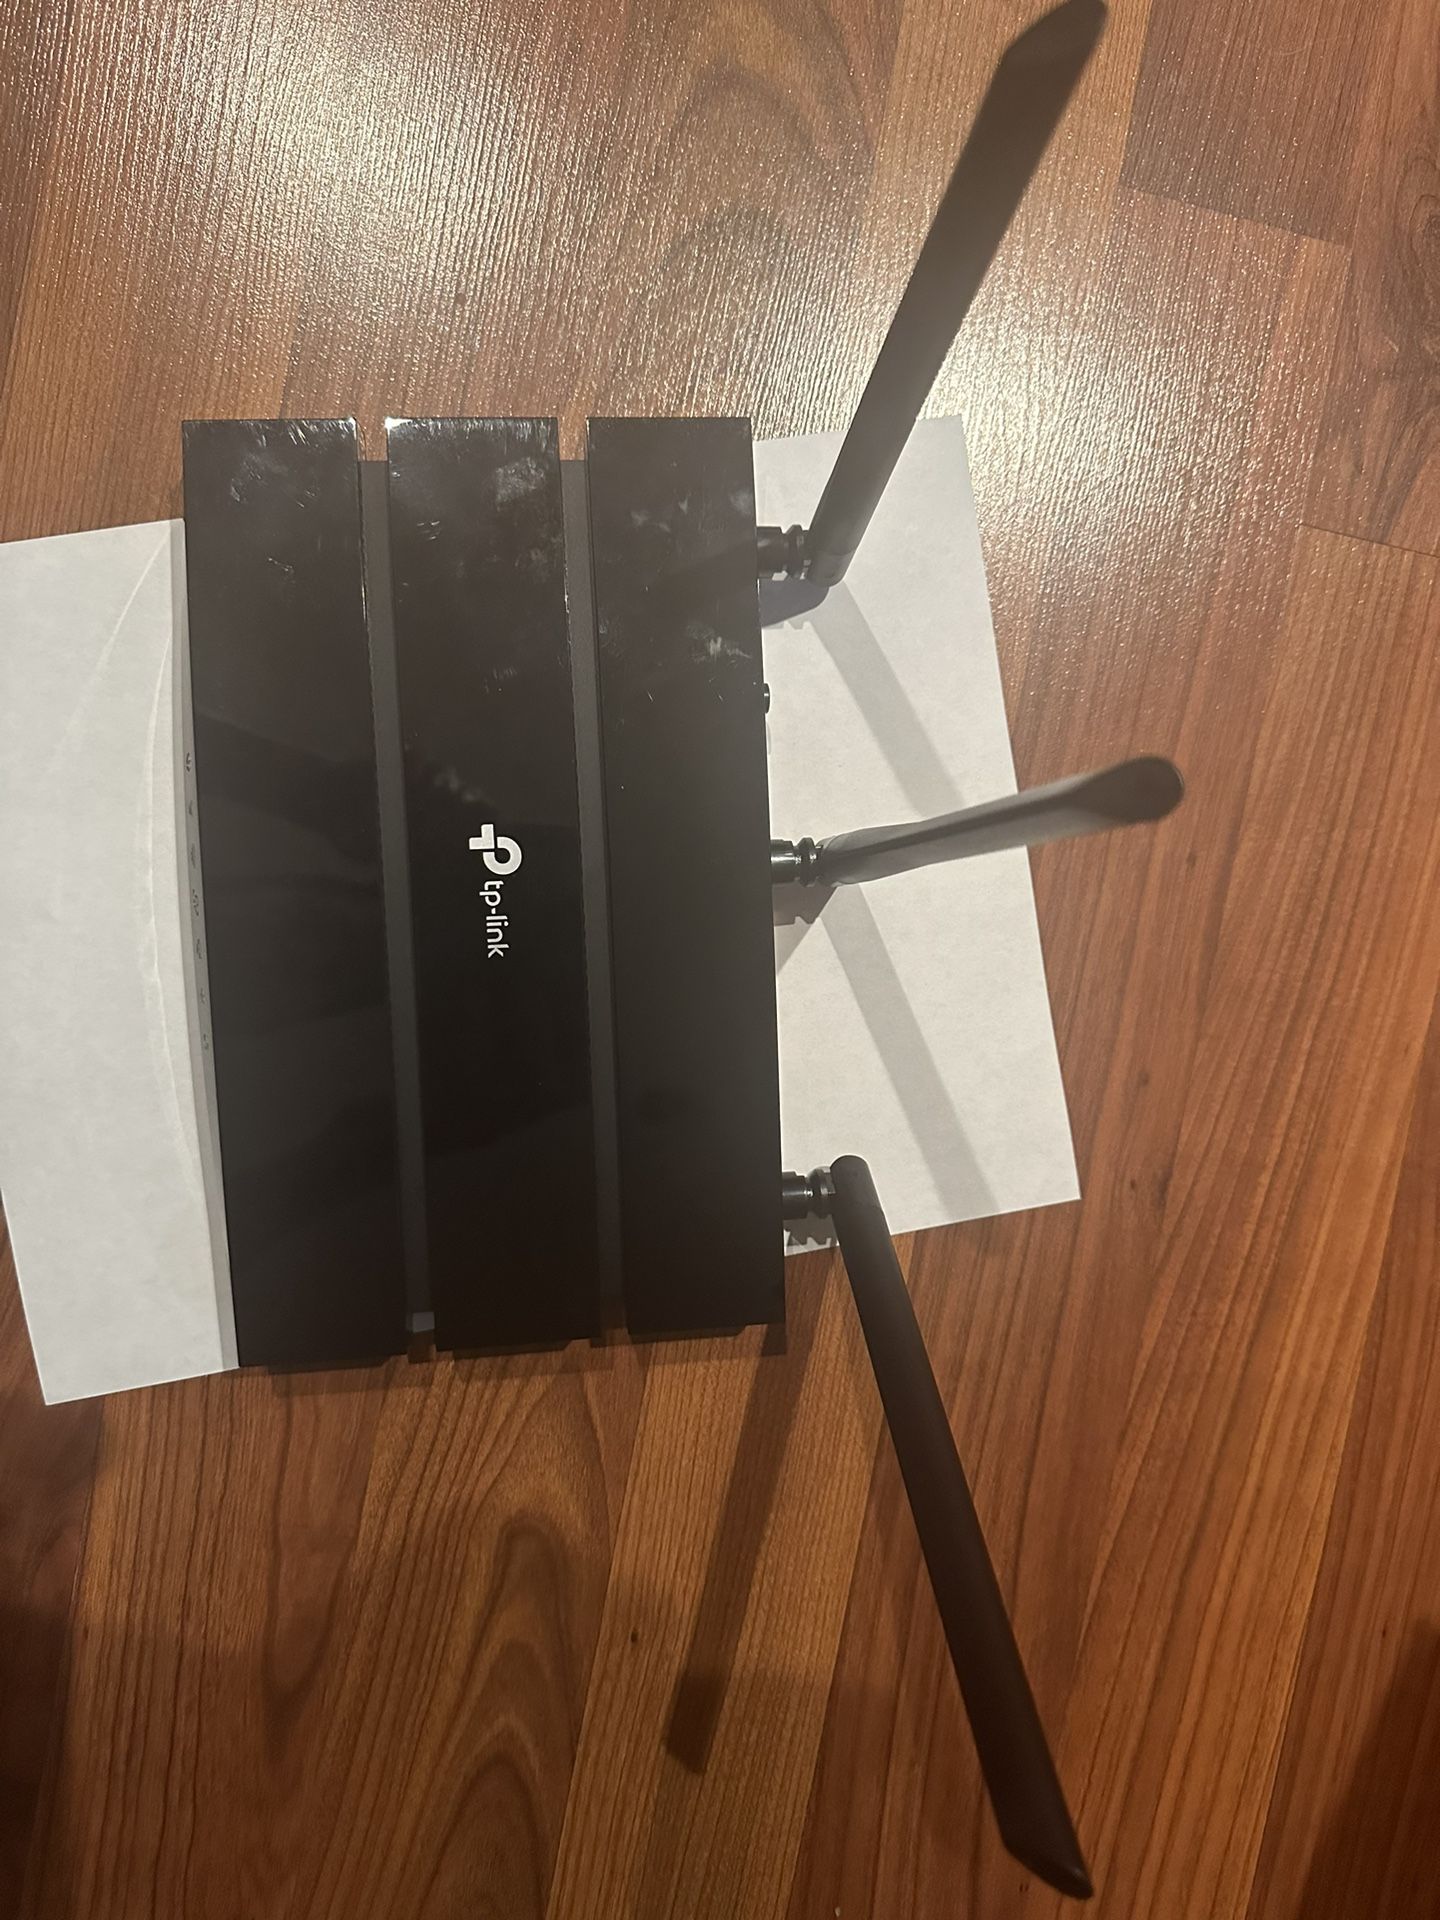 TP-Link AC1350 Router For Sale